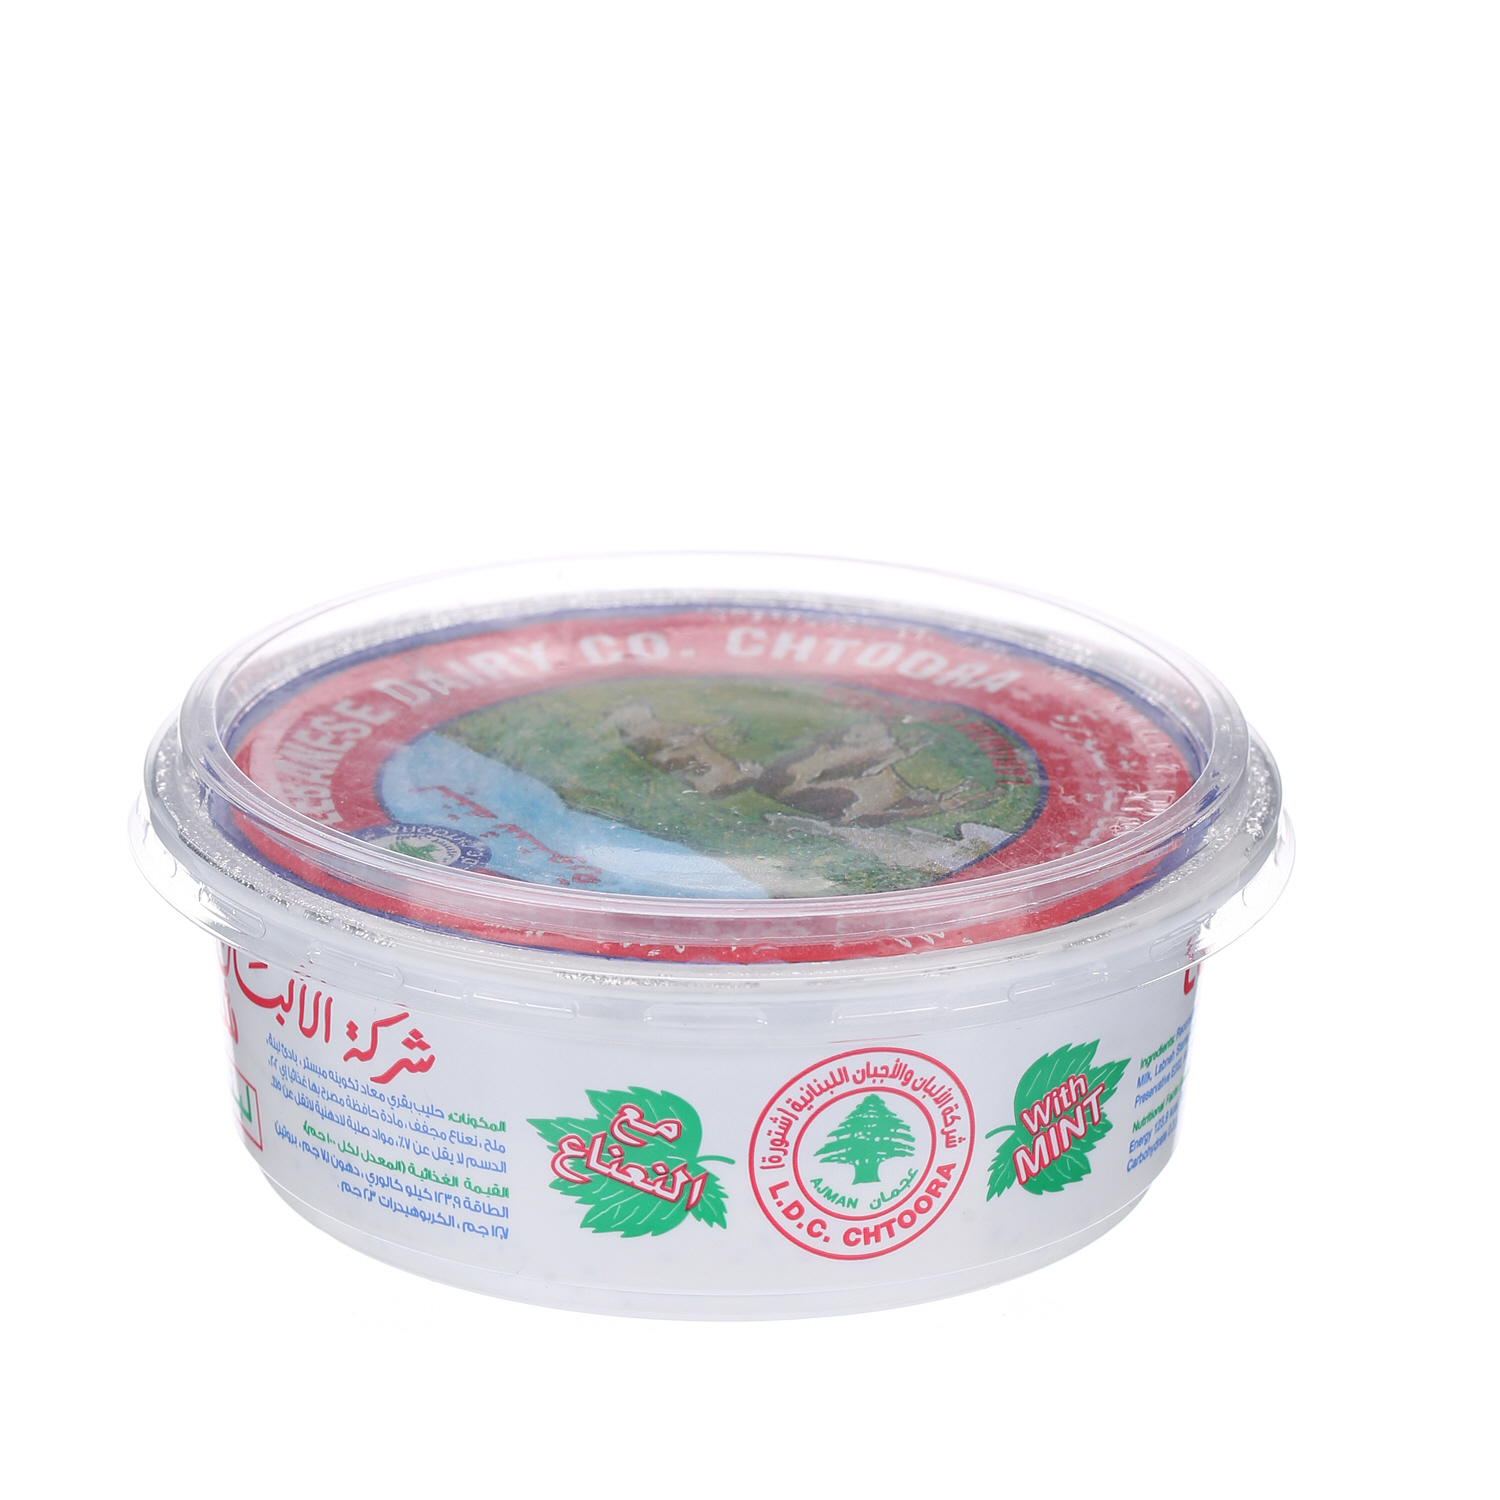 Chtoora Labnah with Mint 225gm